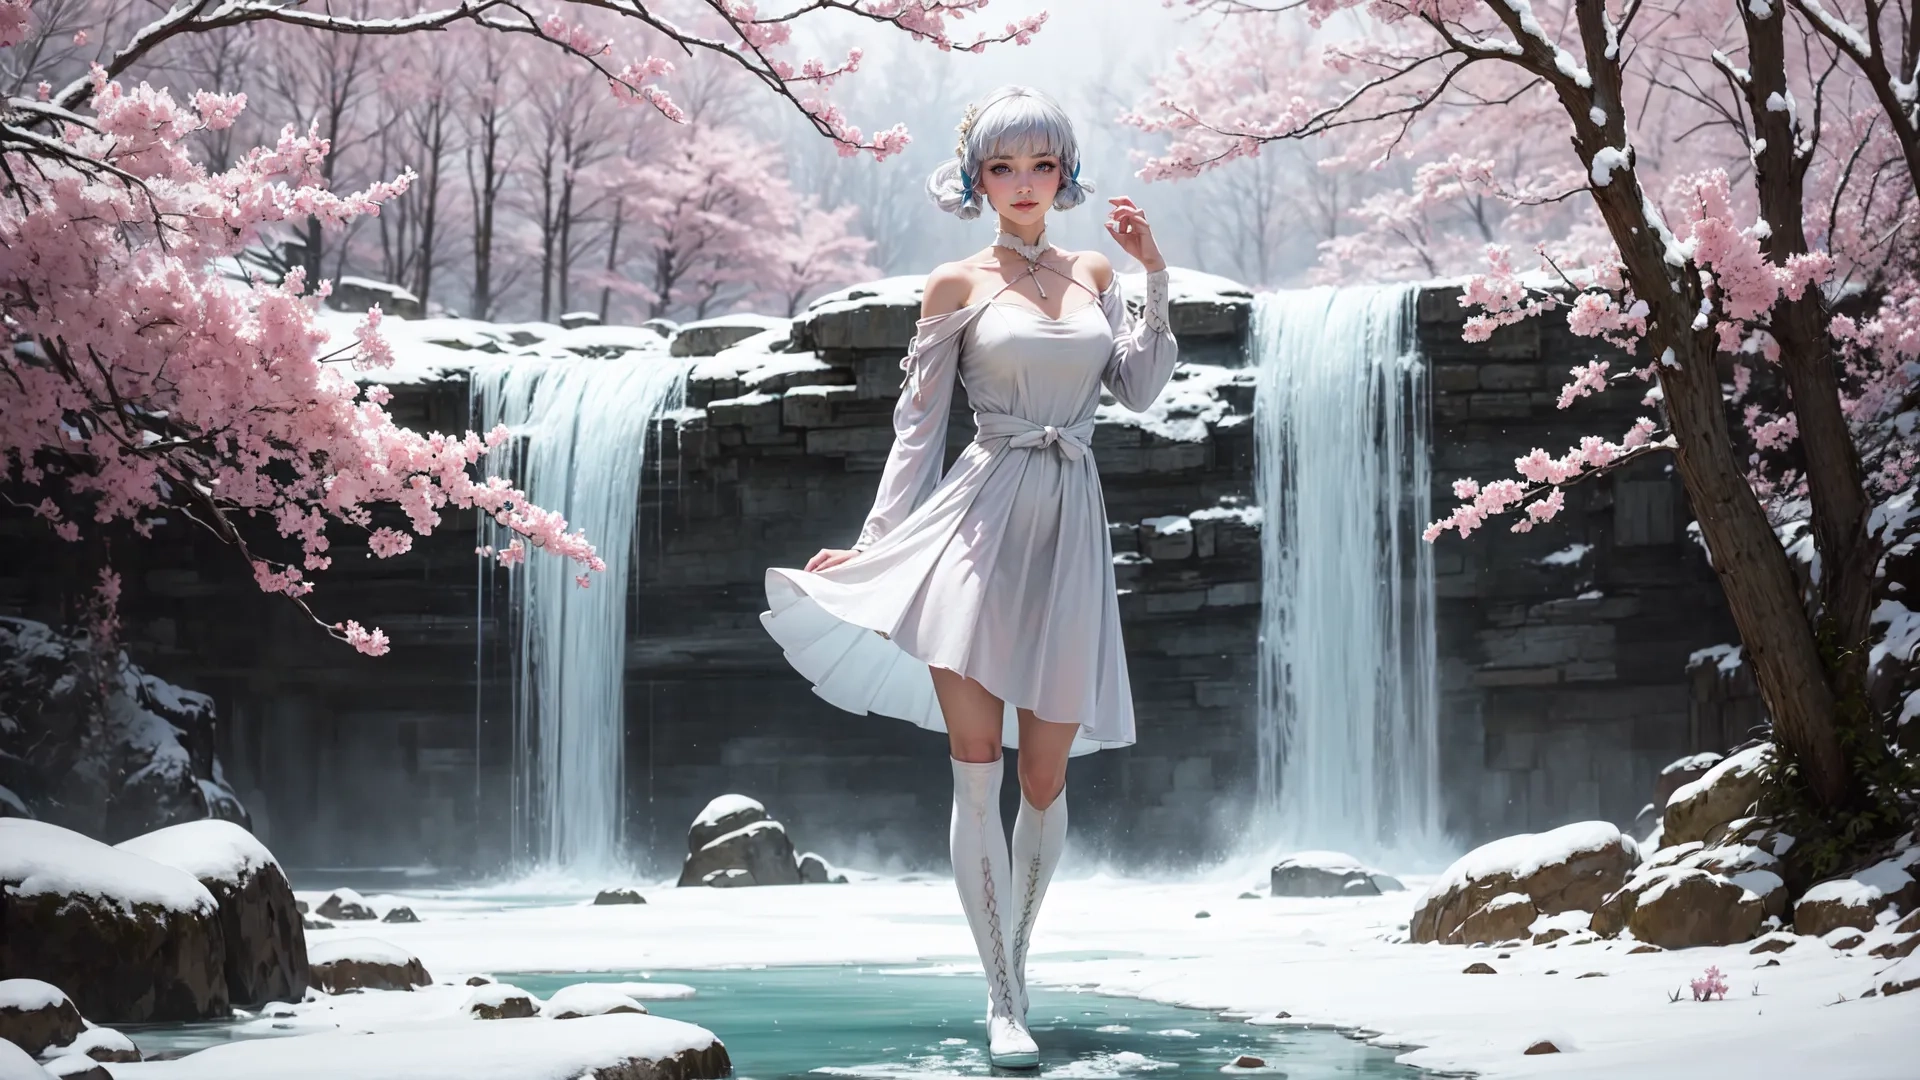 a woman in a white dress by some snow covered ground near trees and water falls with a waterfall going into the valley behind her and there is the background
